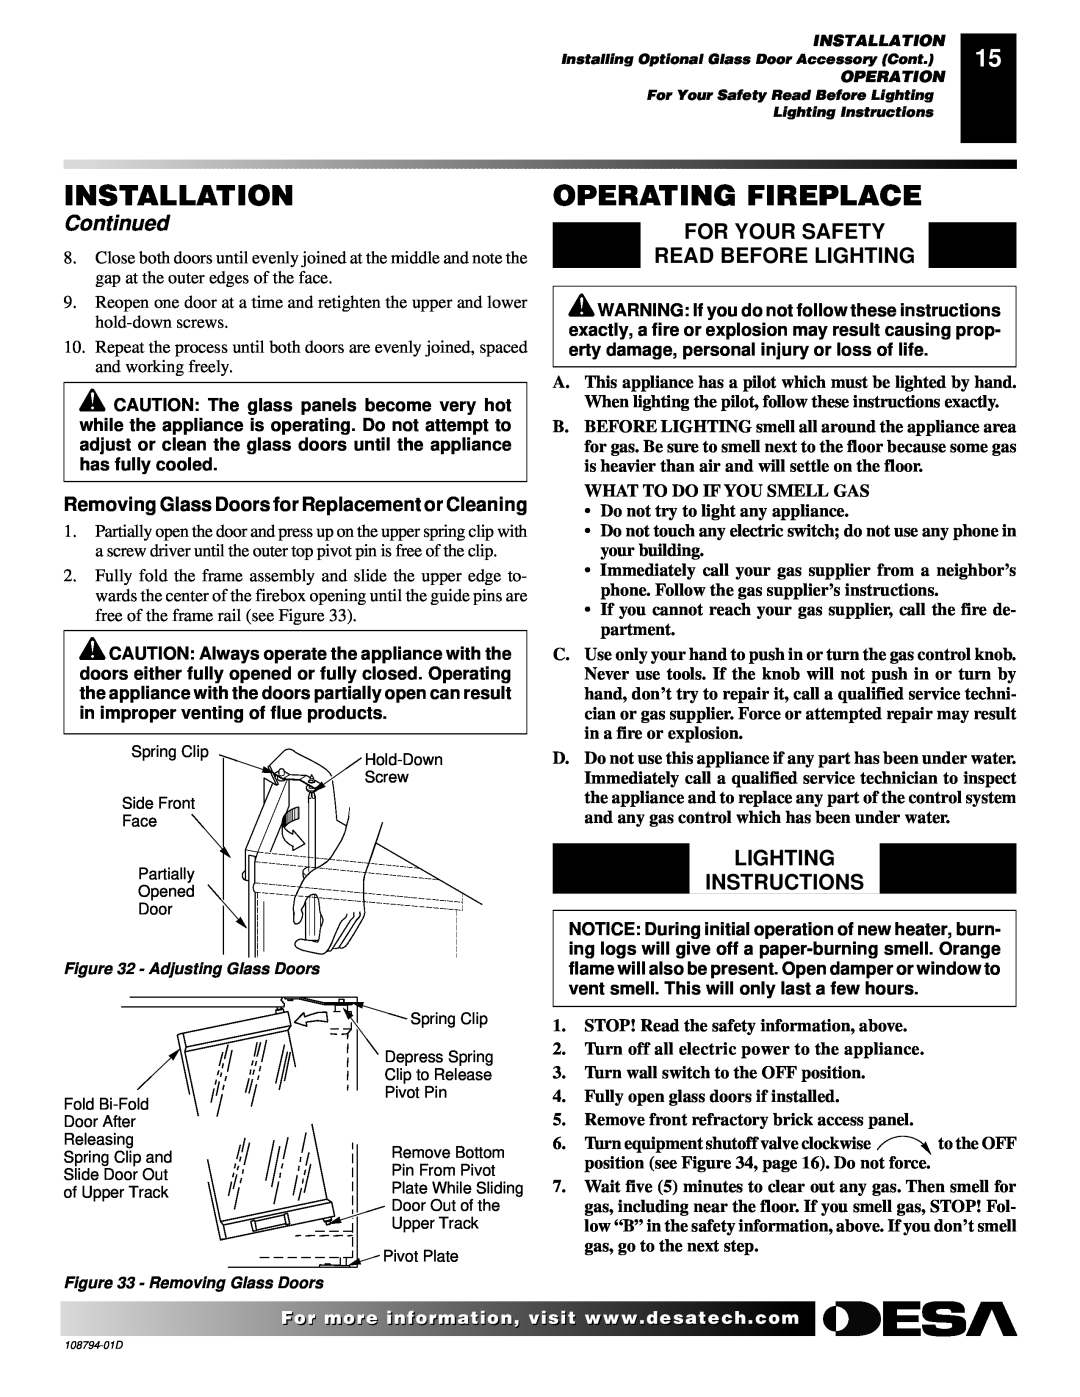 Desa VP325E(B) Operating Fireplace, Installation, Continued, For Your Safety Read Before Lighting, Lighting Instructions 